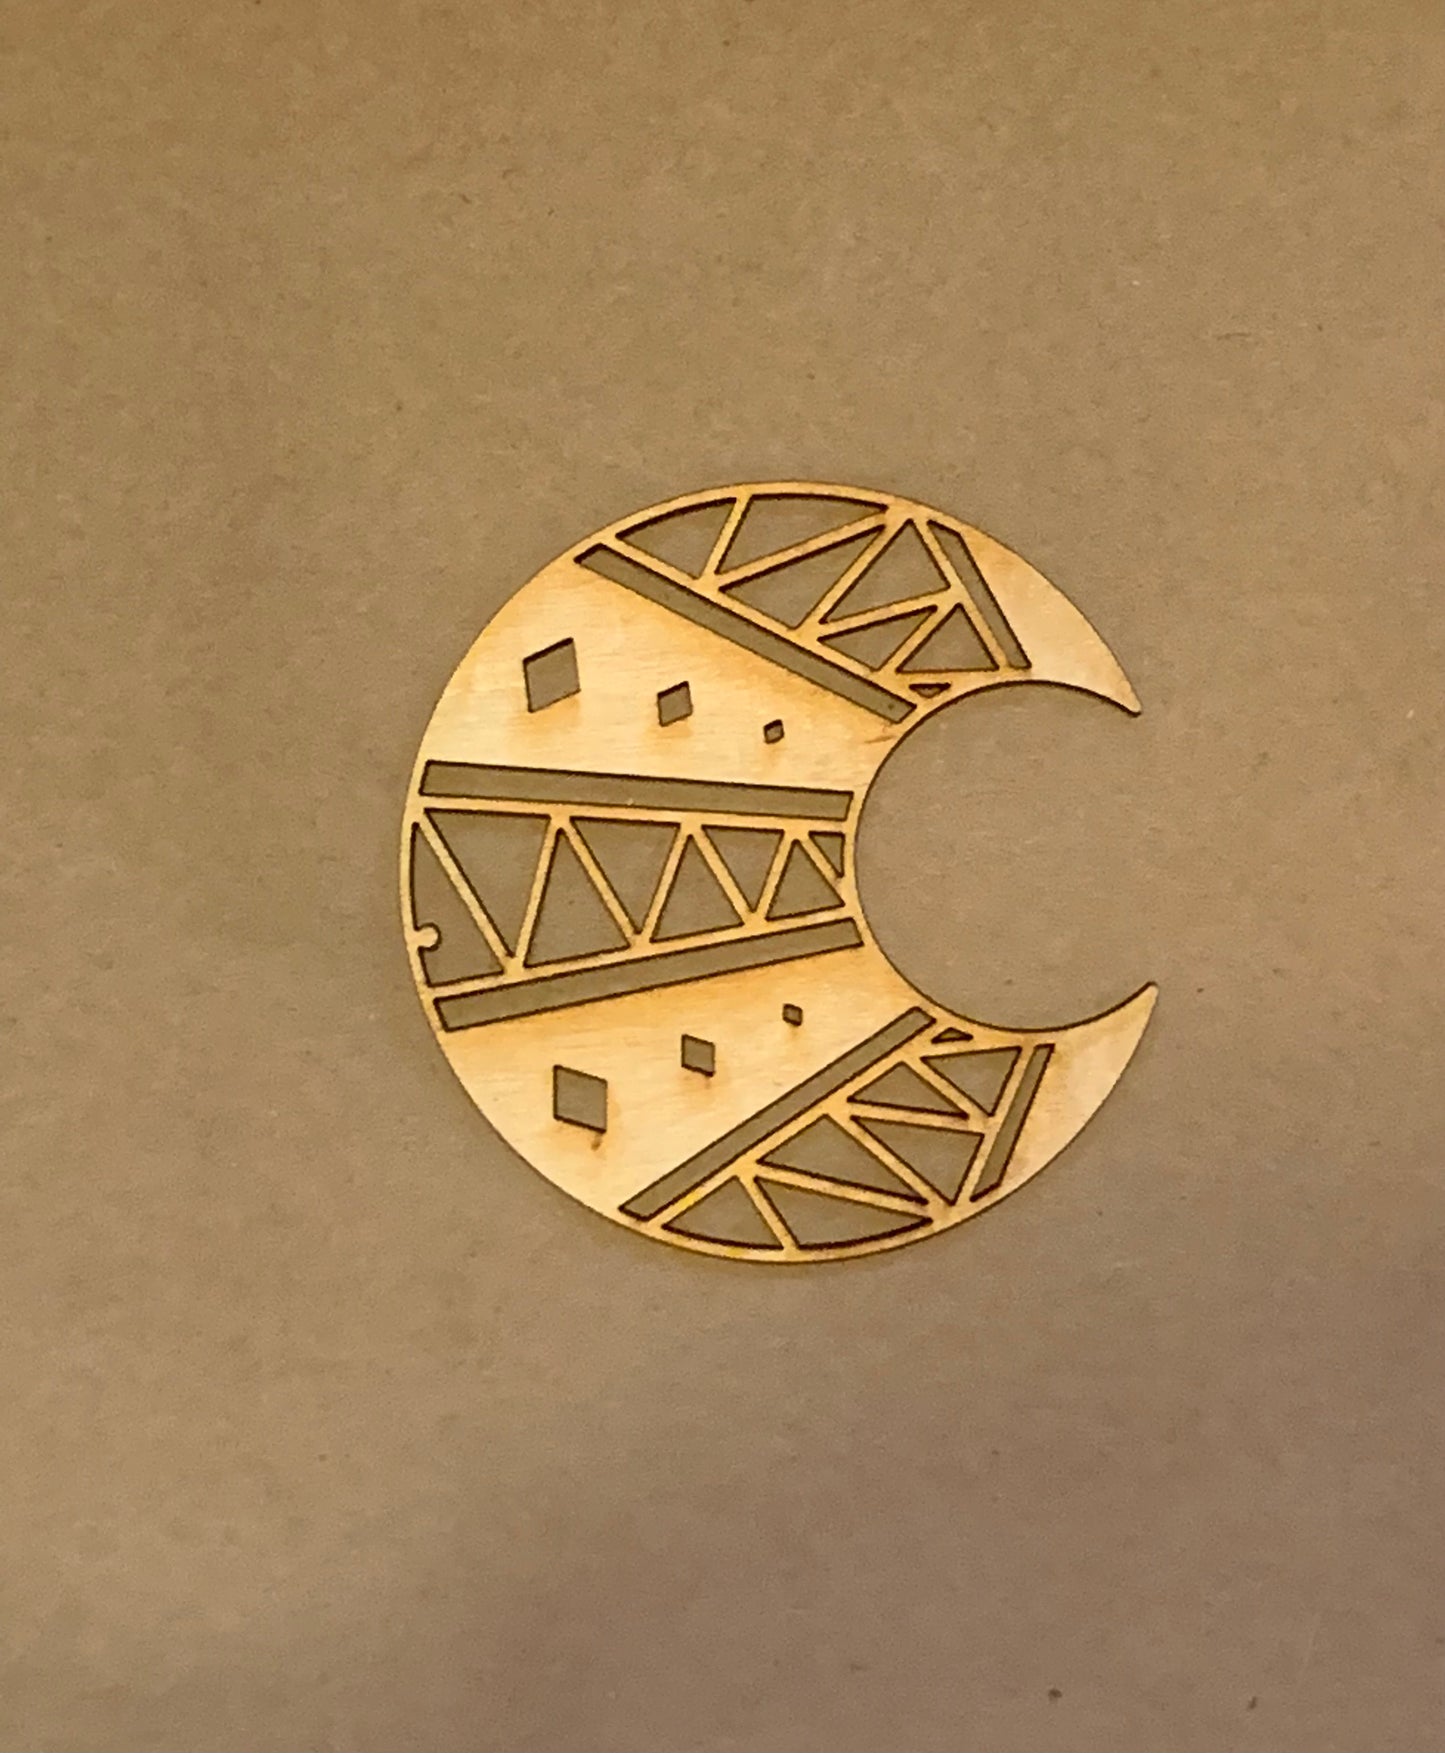 Set of 12 - 4” Moon Cut Out Unfinished Wood frame. Resin art frame. DIY wood cutout. Unfinished laser cut wood resin frame.